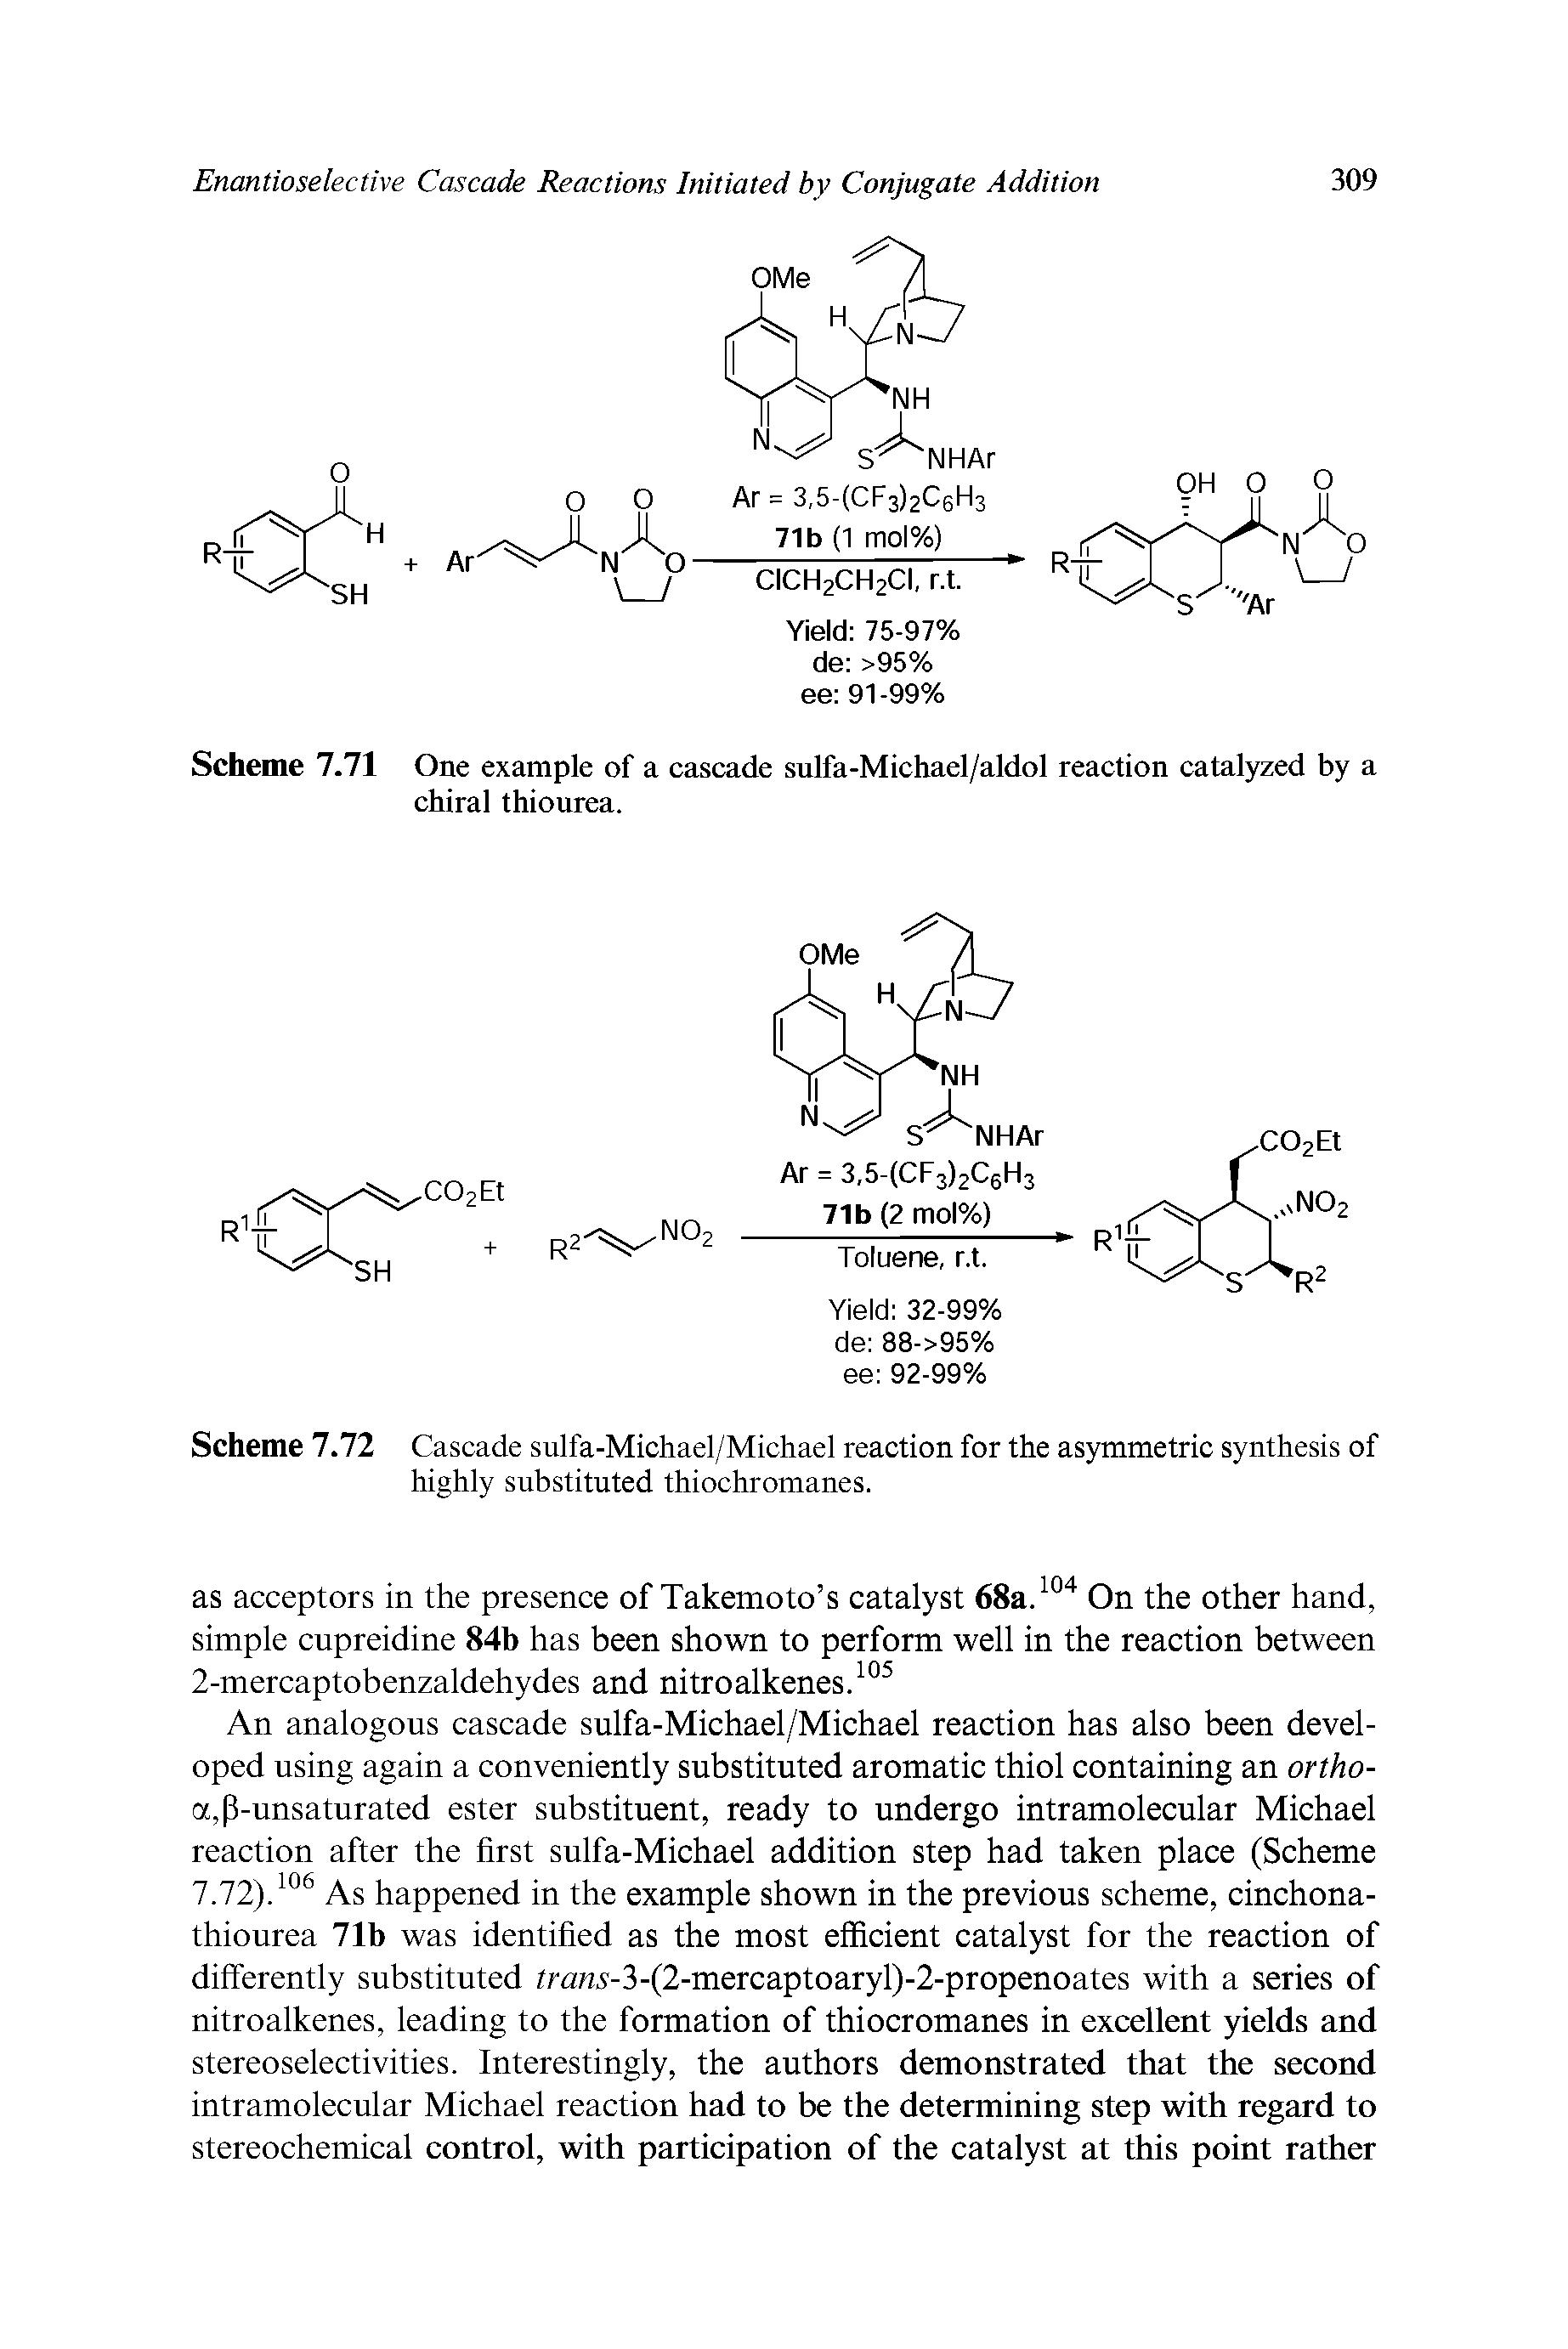 Scheme 7.71 One example of a cascade sulfa-Michael/aldol reaction catalyzed by a chiral thiourea.